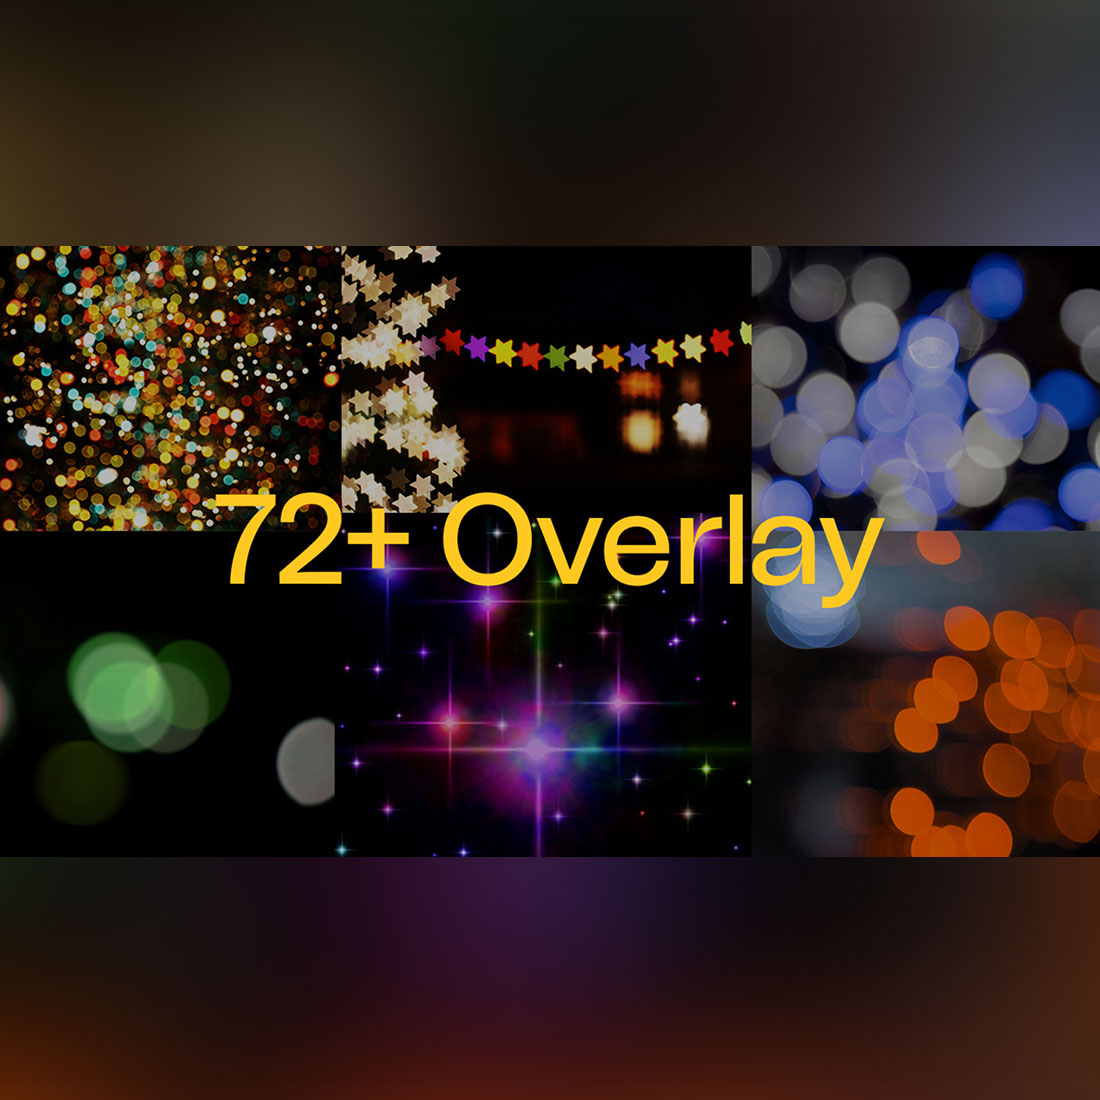 Background Overlay 72+ Images Pack created by Gaurav_21.